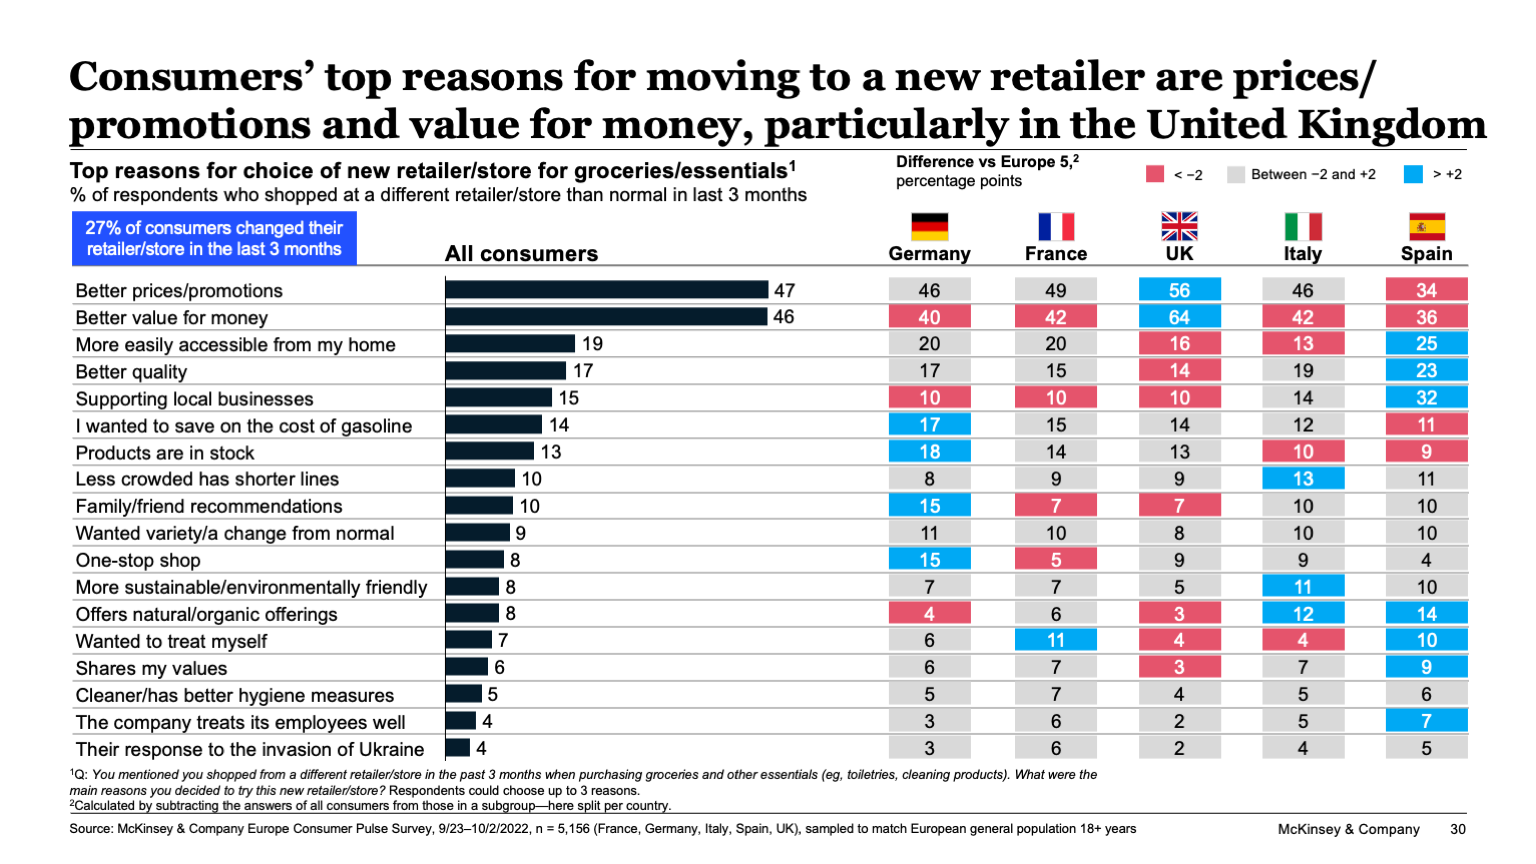 Consumers’ top reasons for moving to a new retailer are prices/ promotions and value for money, particularly in the United Kingdom